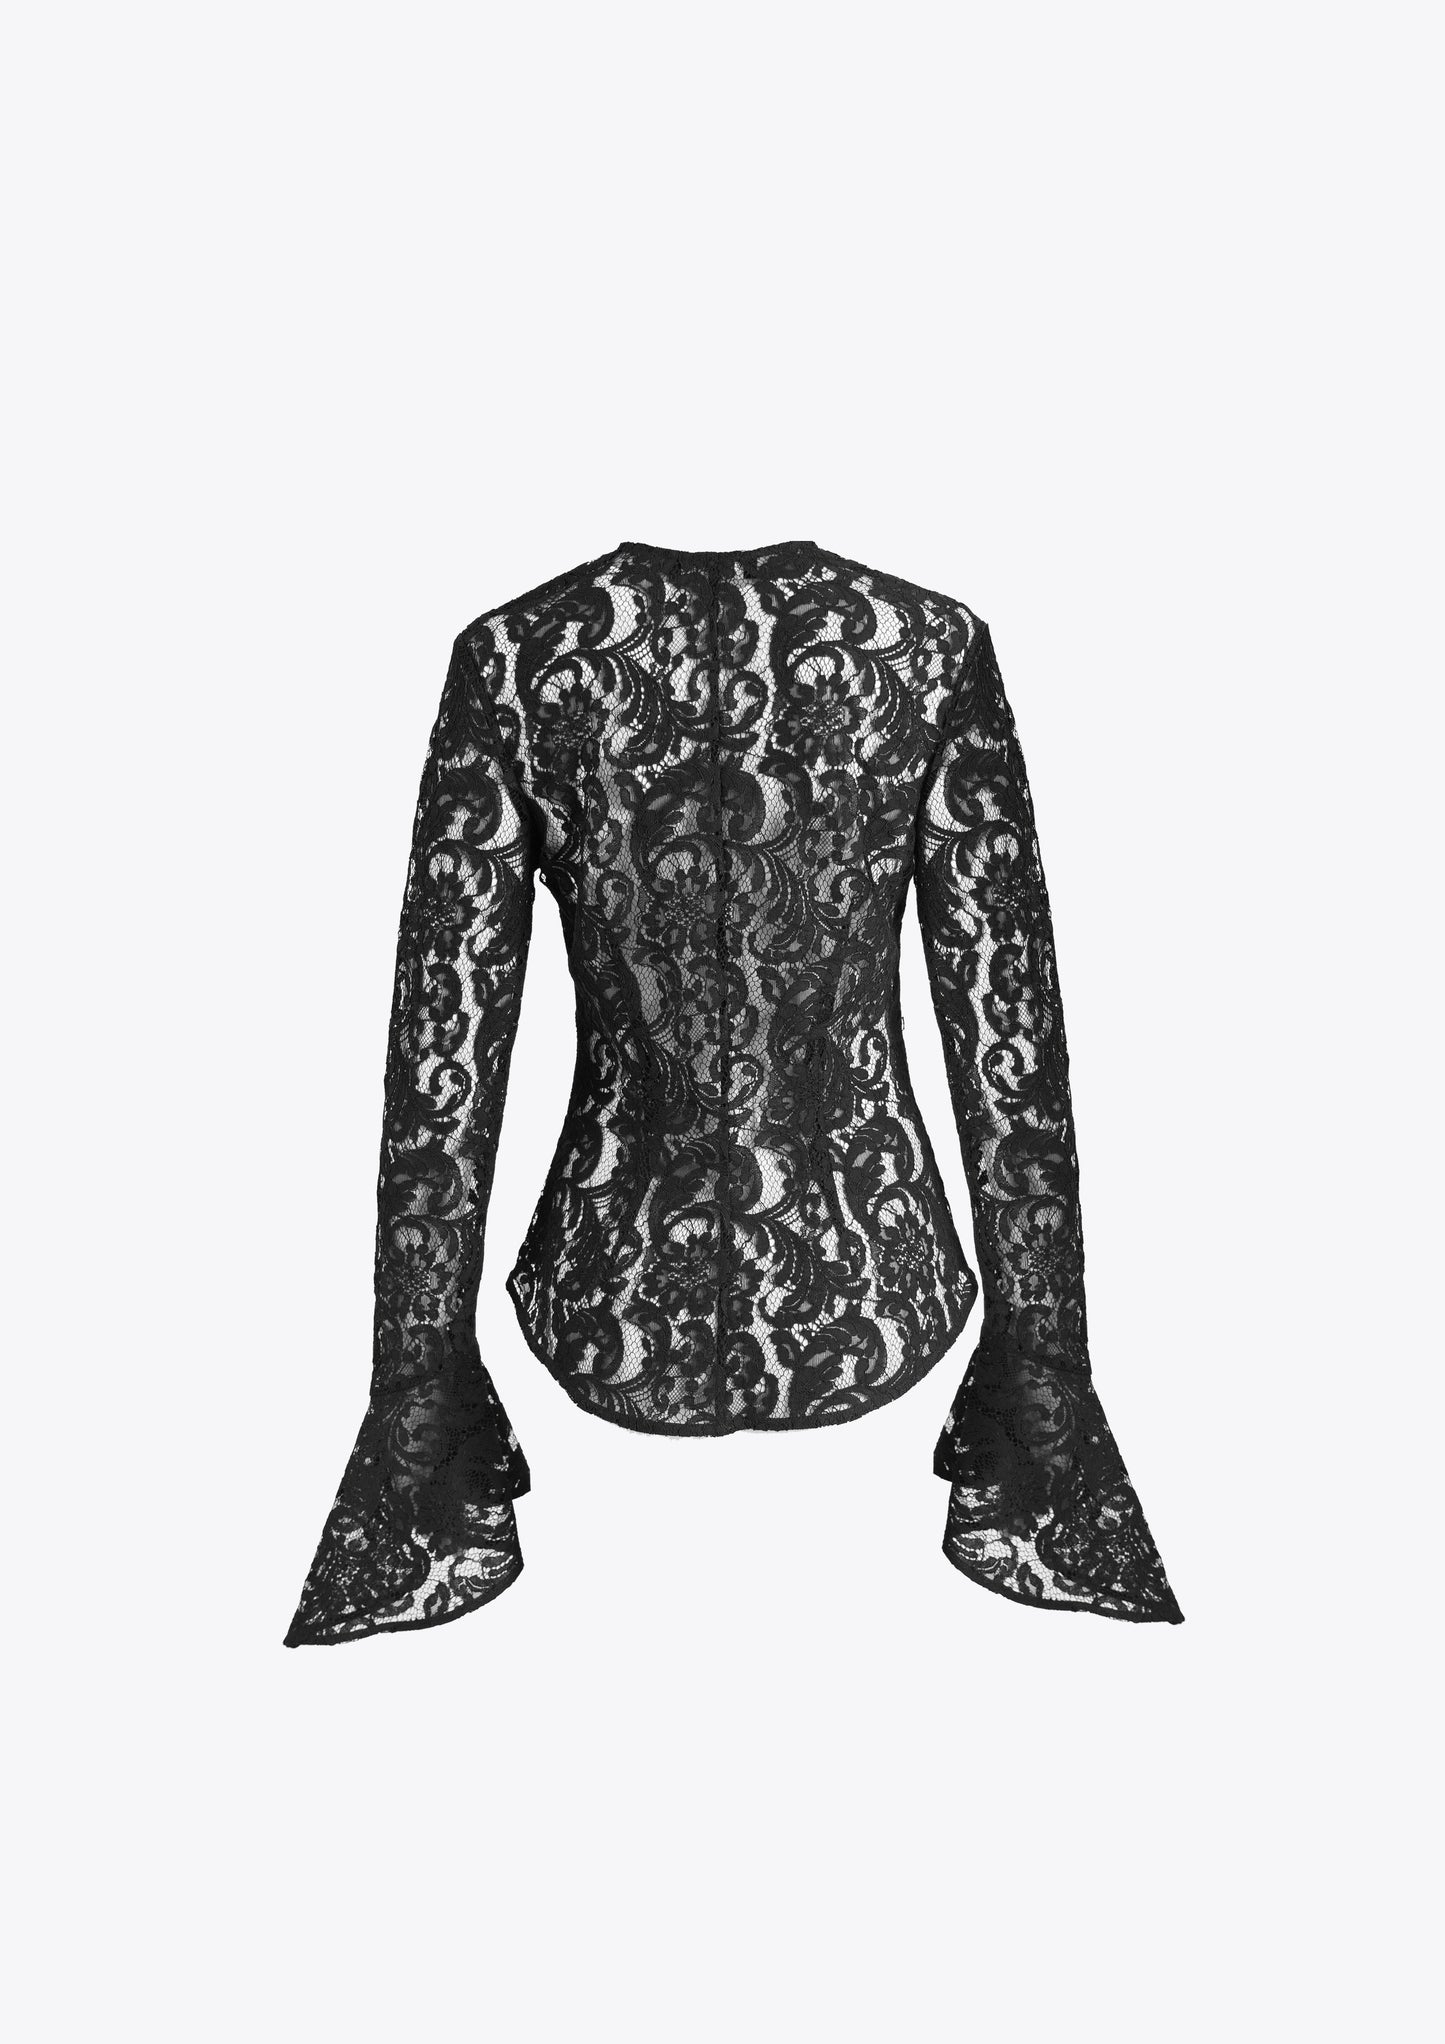 Tiree - The Lace blouse